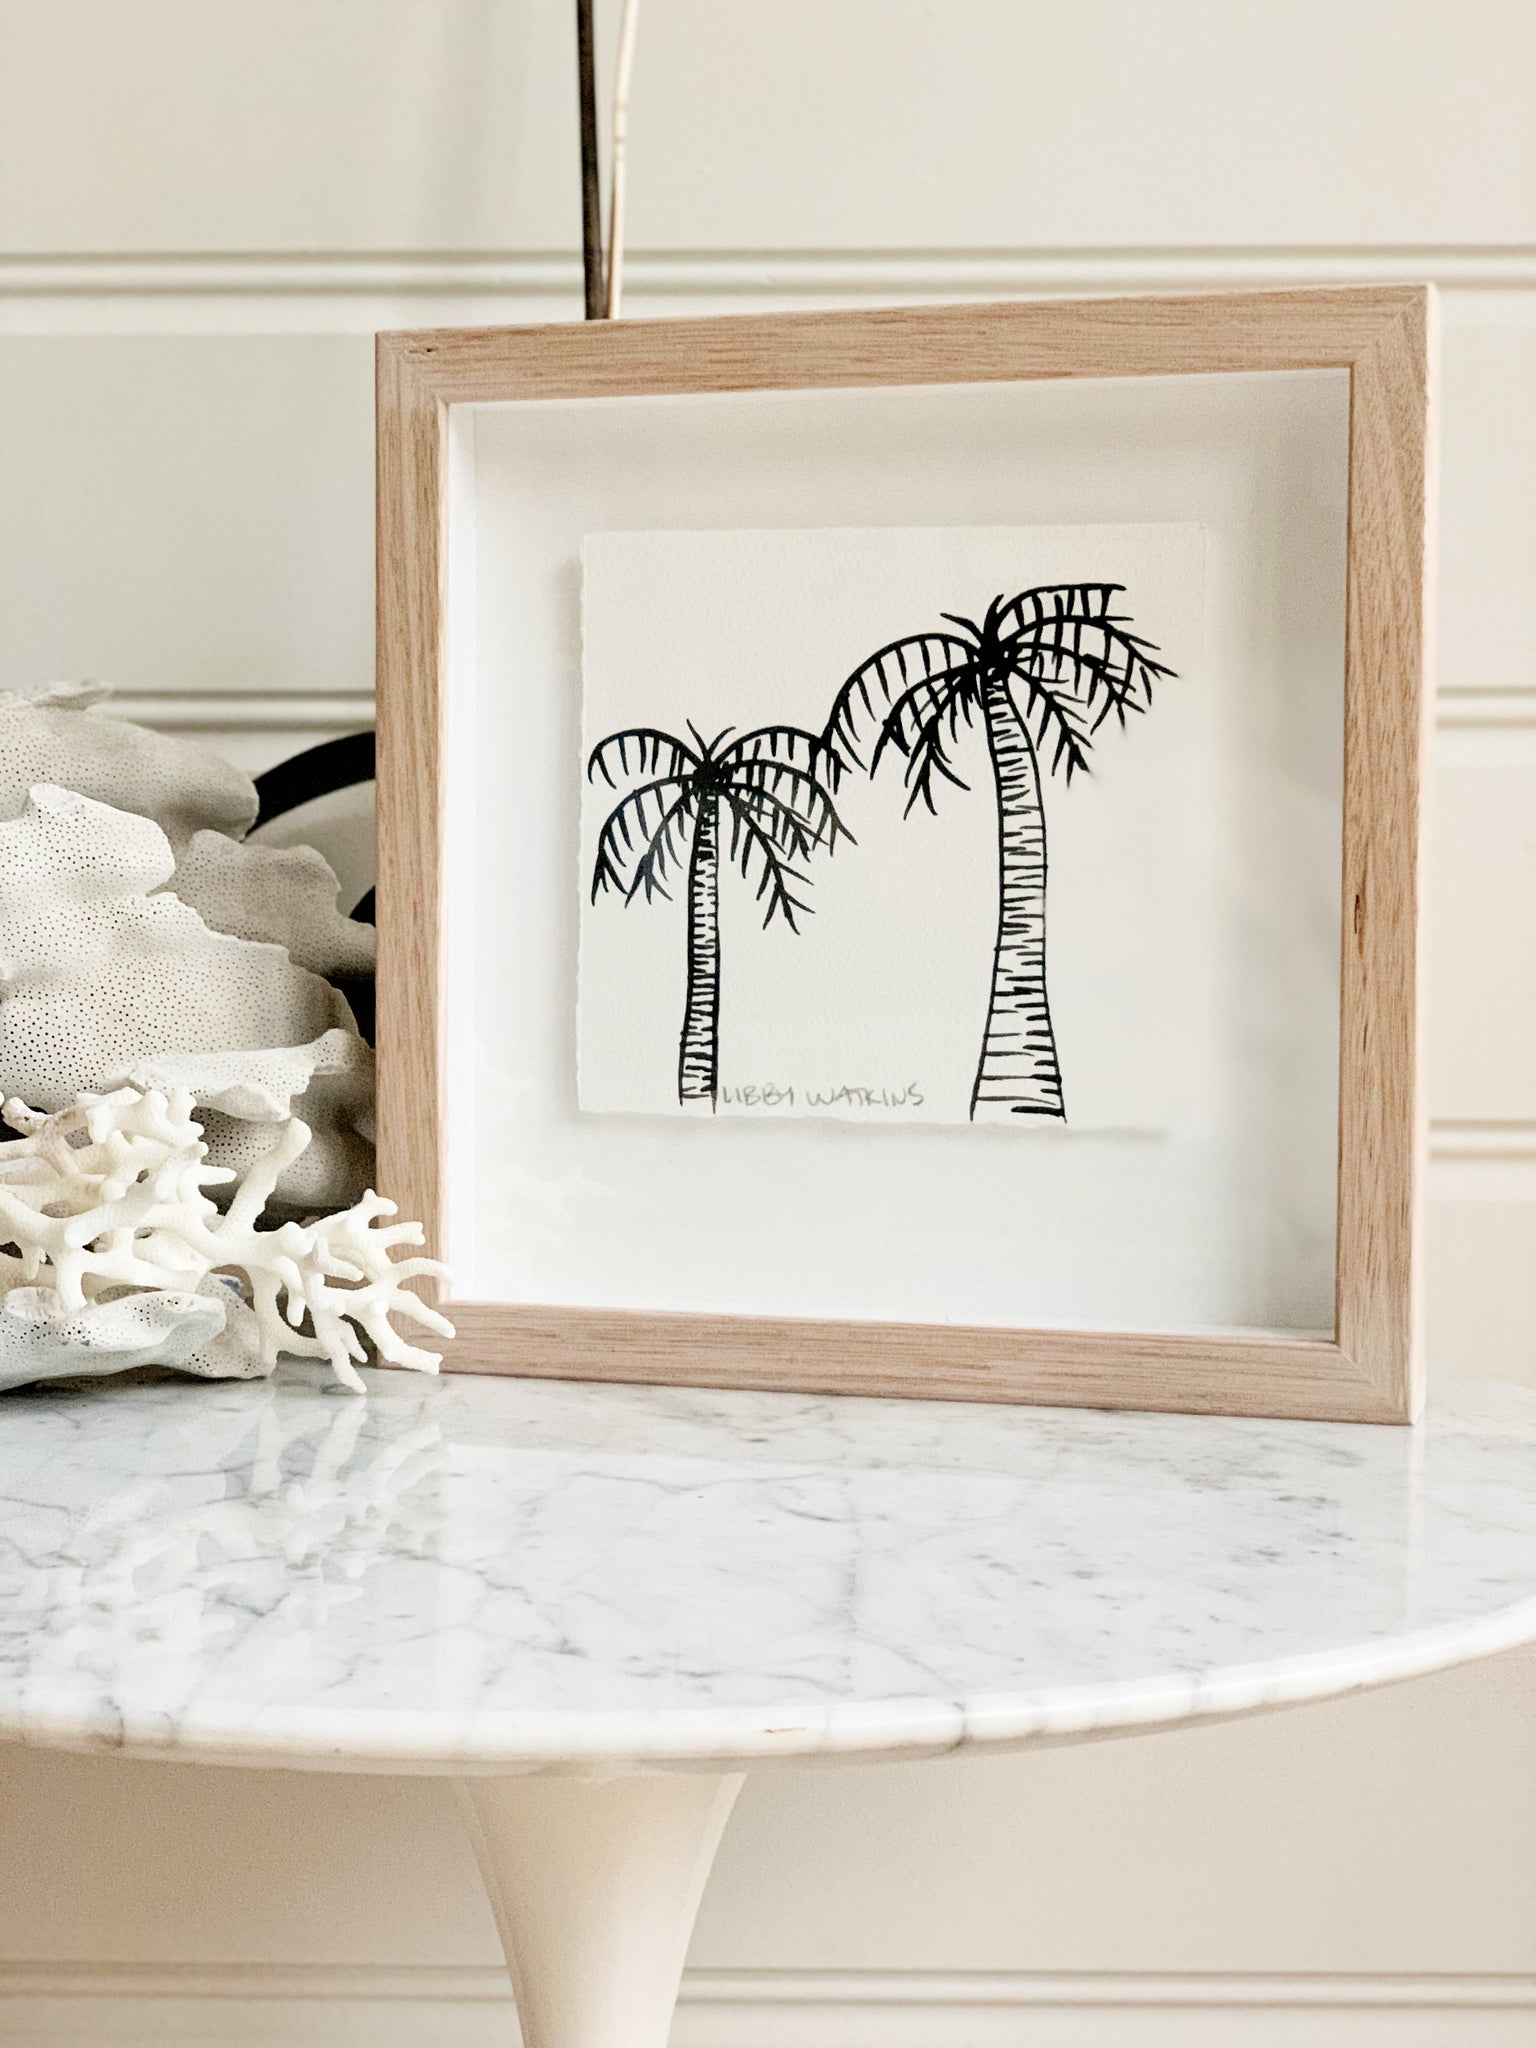 Signature Libby Watkins | Mini Ink Palm | 91802 | Made to order with artist Libby Watkins